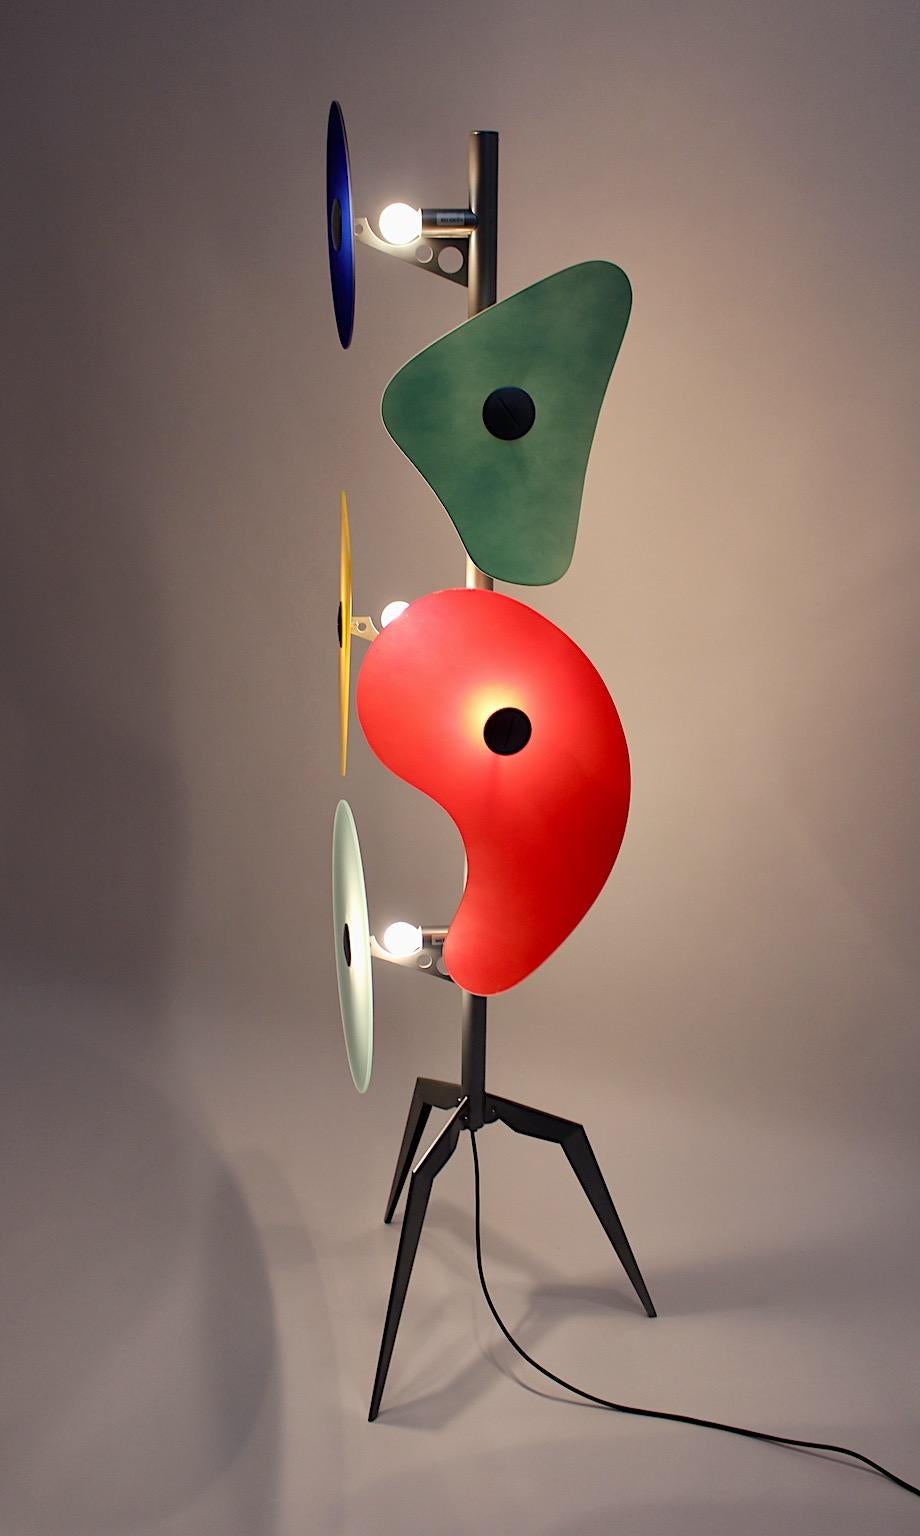 Modern multicolored vintage floor lamp model Orbital Terra by Ferrucchio Laviani, which was designed 1992 for Foscarini, Italy.
The multicolored lamp shades from satined glass with different shapes form with the metal frame an outstanding